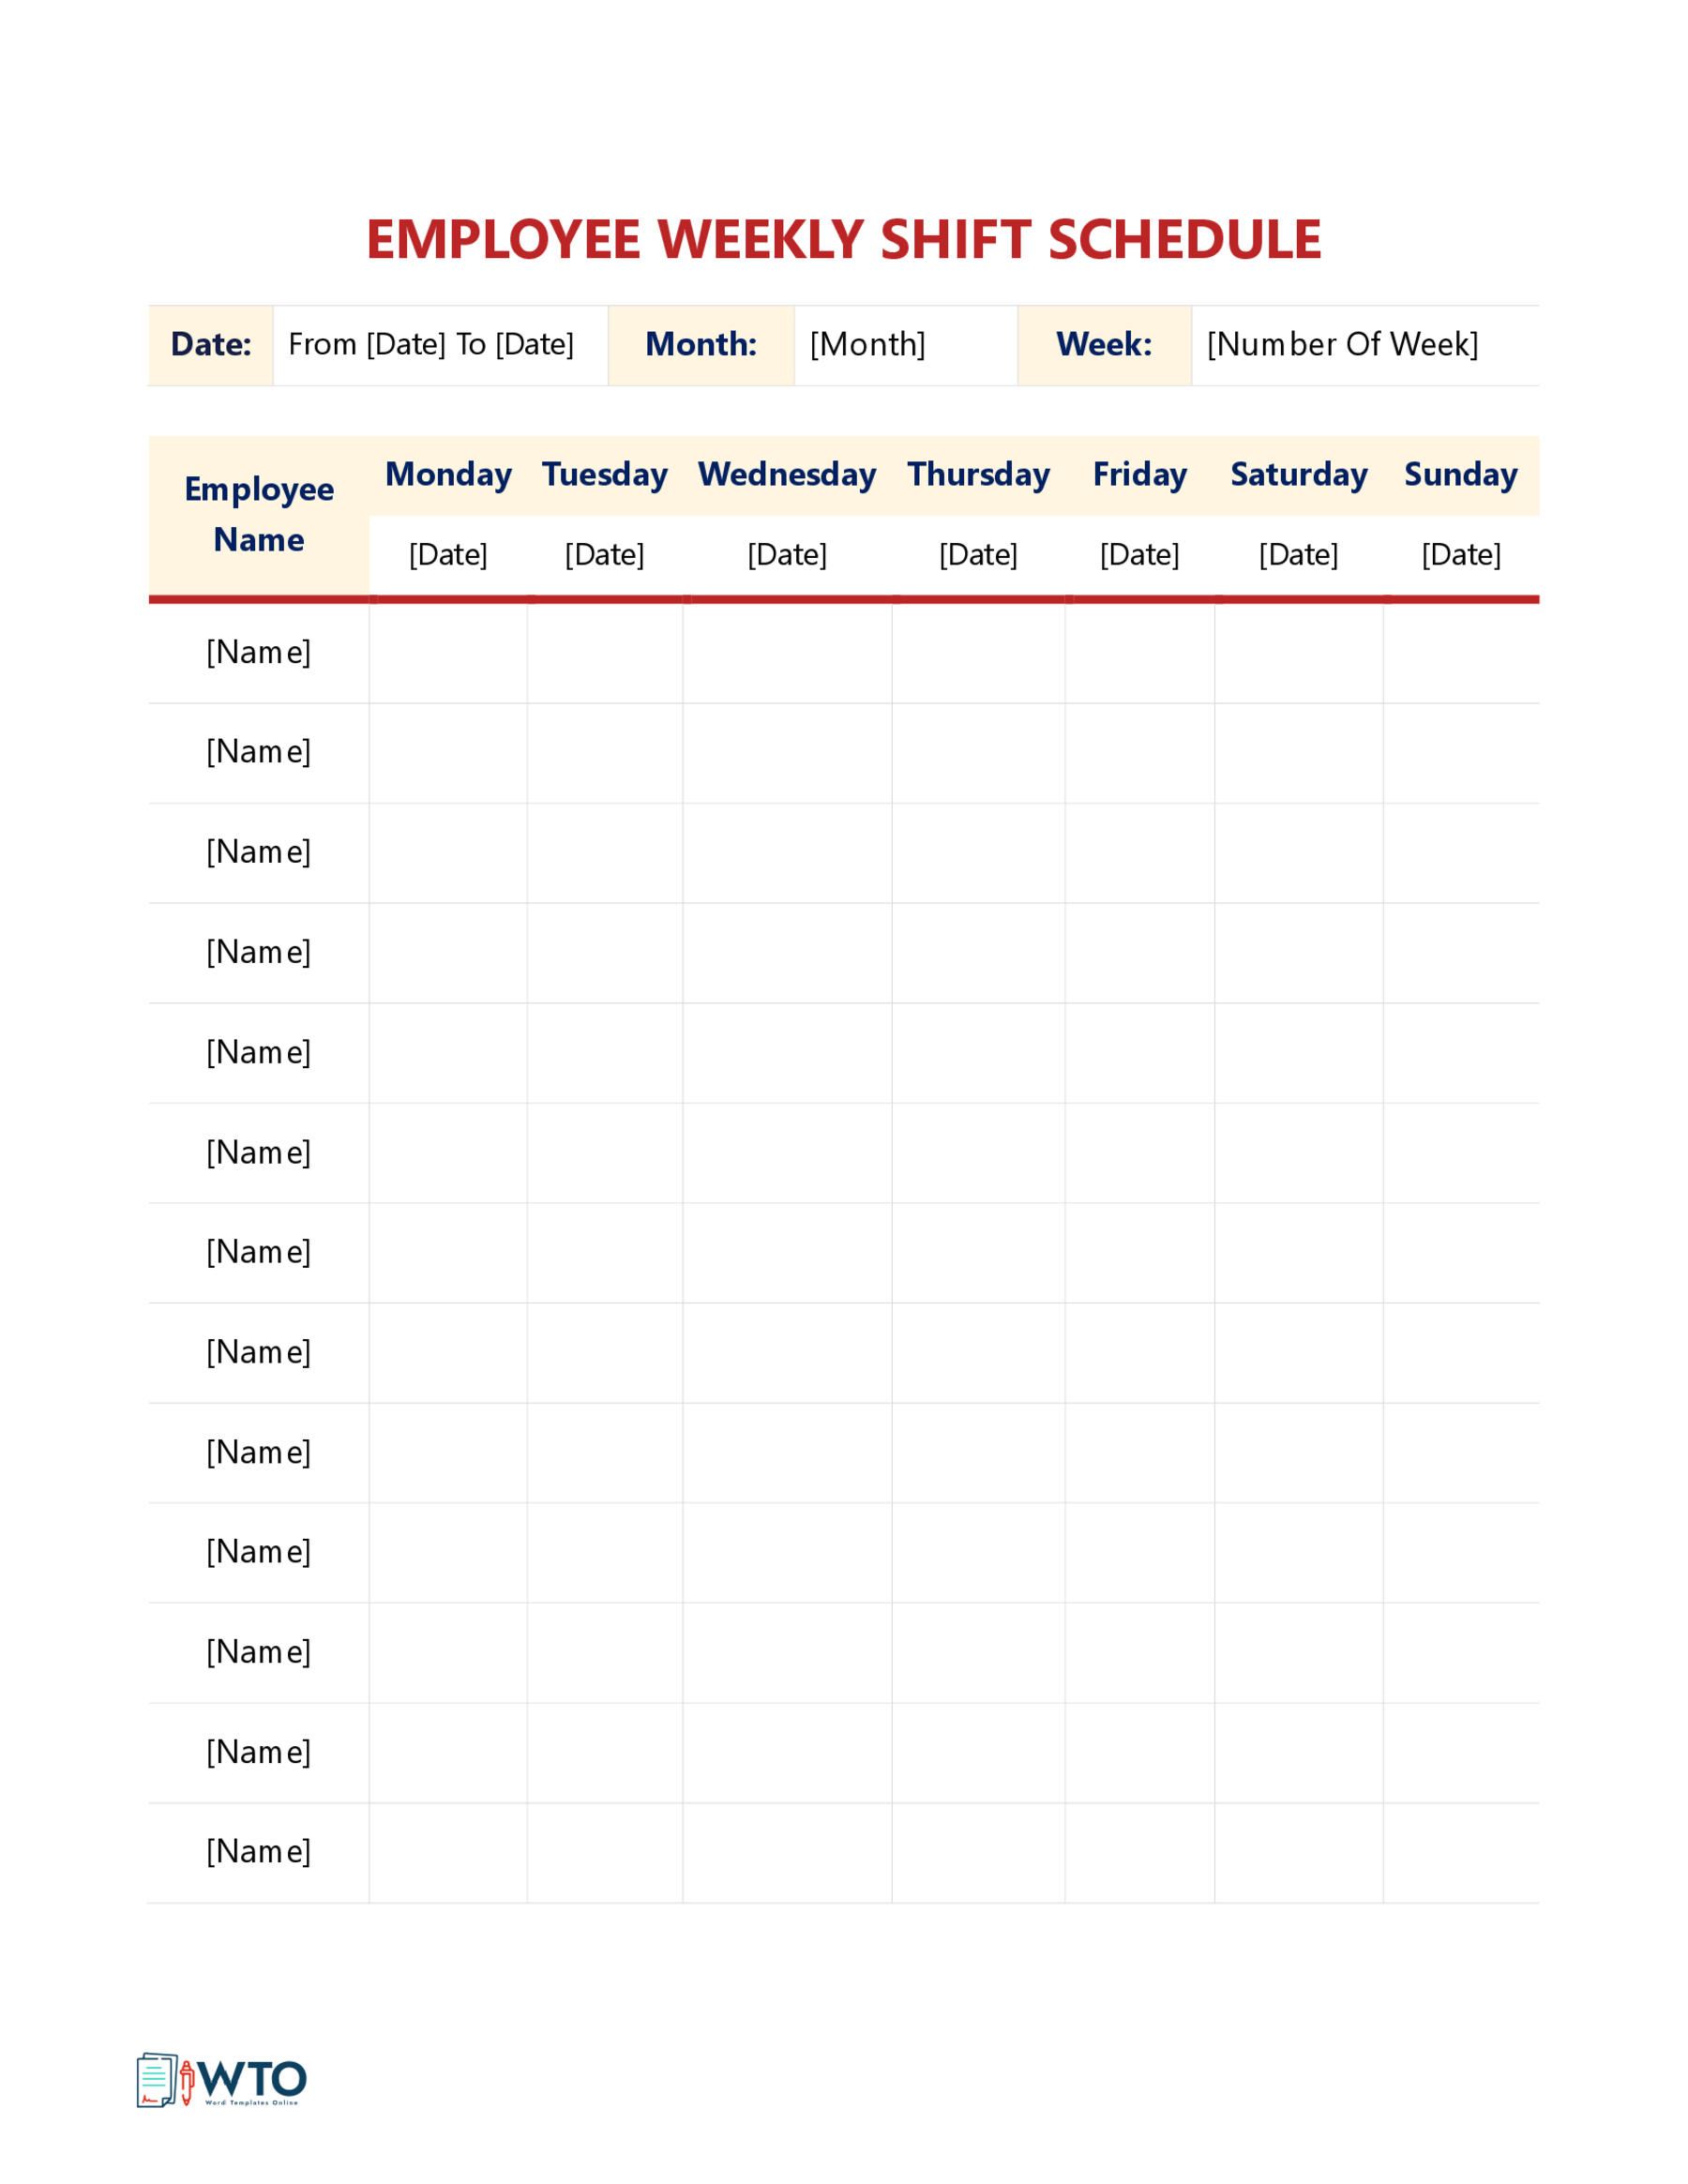 Employees’ Weekly Shift Schedule Example - Sample Document